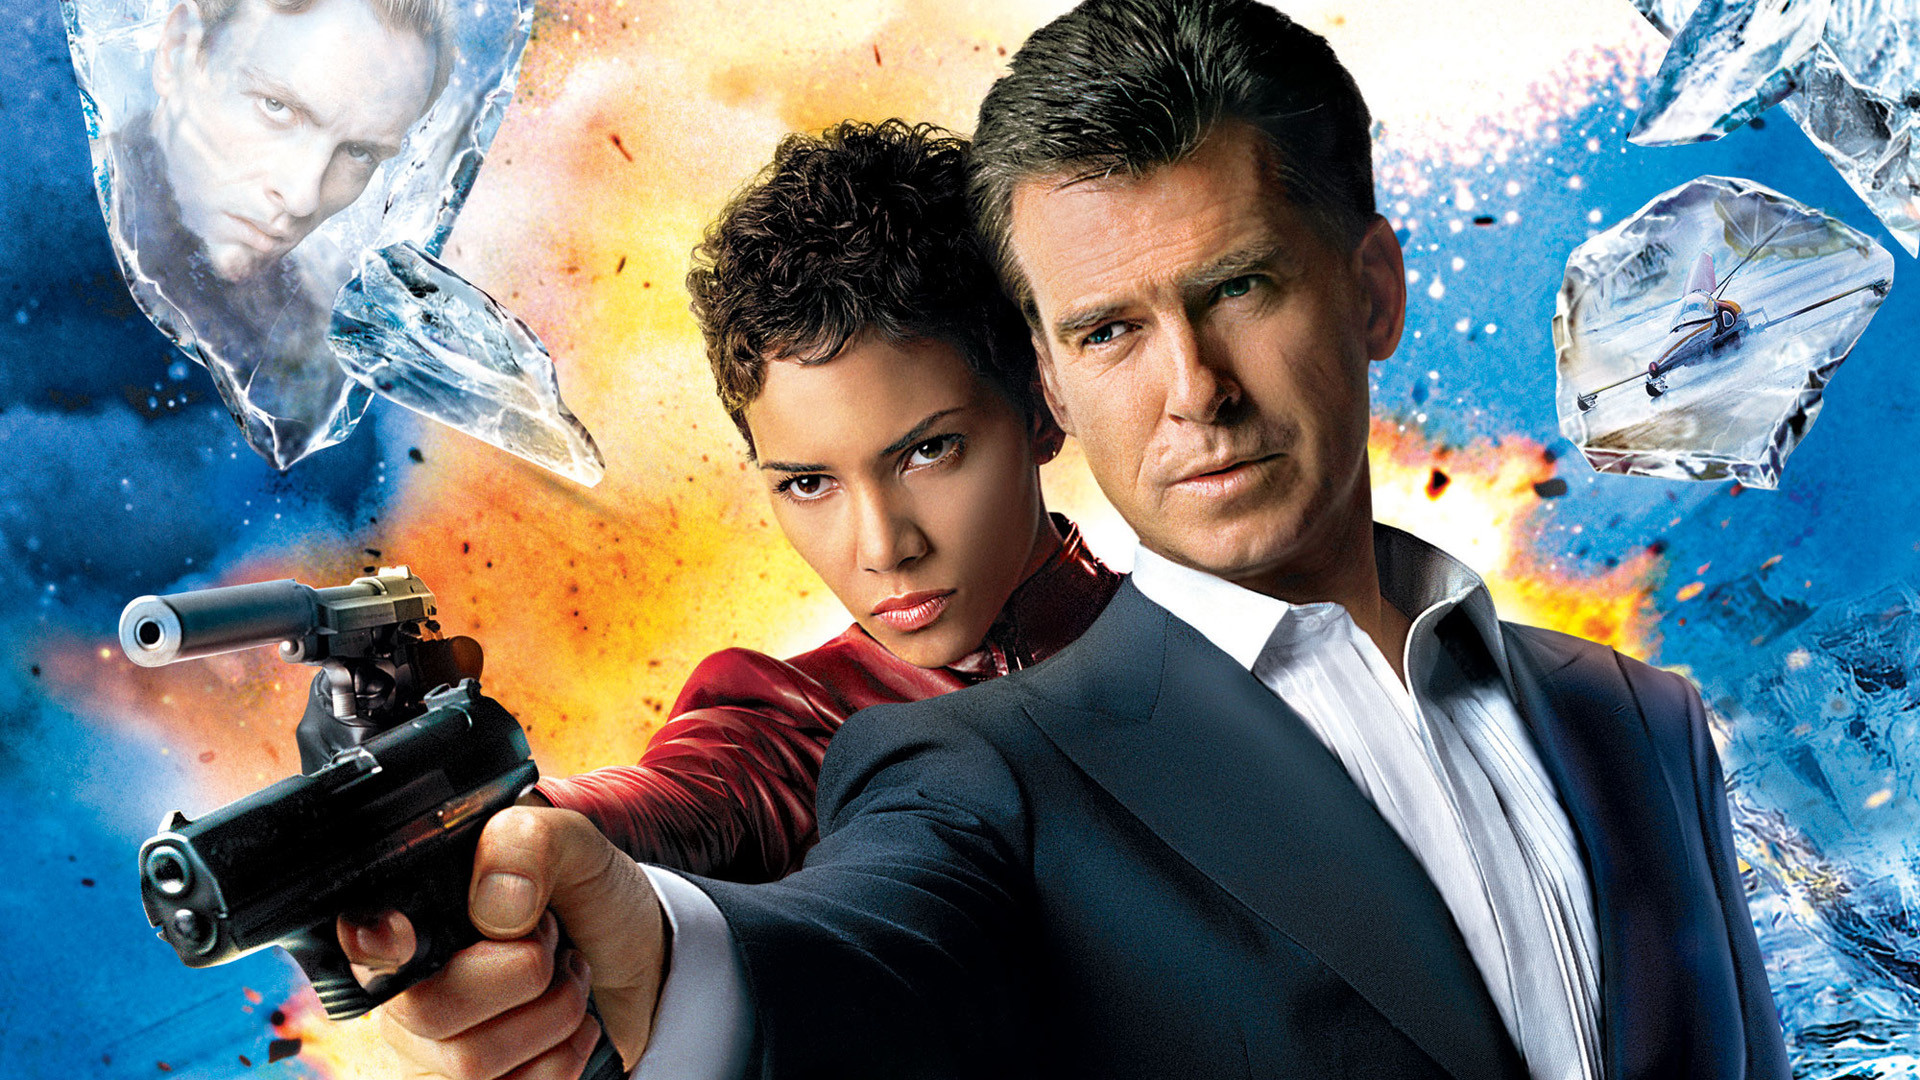 Halle Berry Xxx Porn - Does It Look Like It's Our First Time? DIE ANOTHER DAY